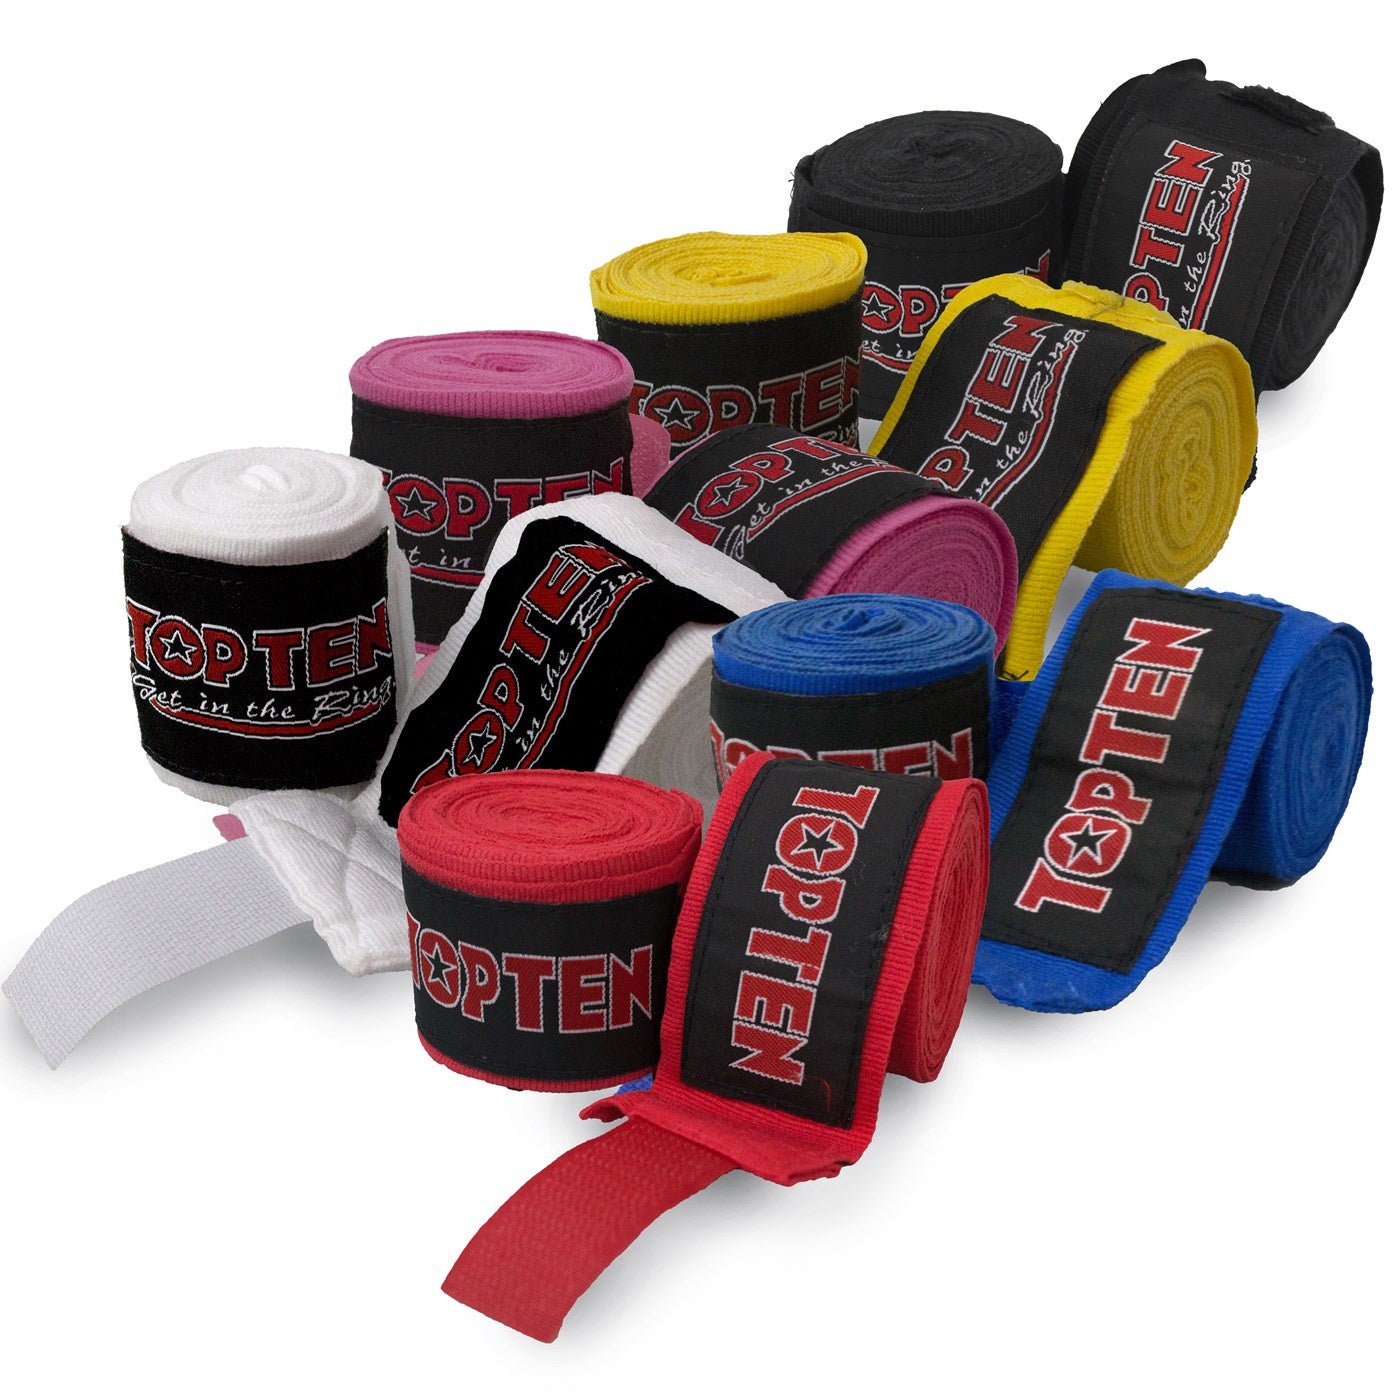 Boxing hand wraps - from Top Ten